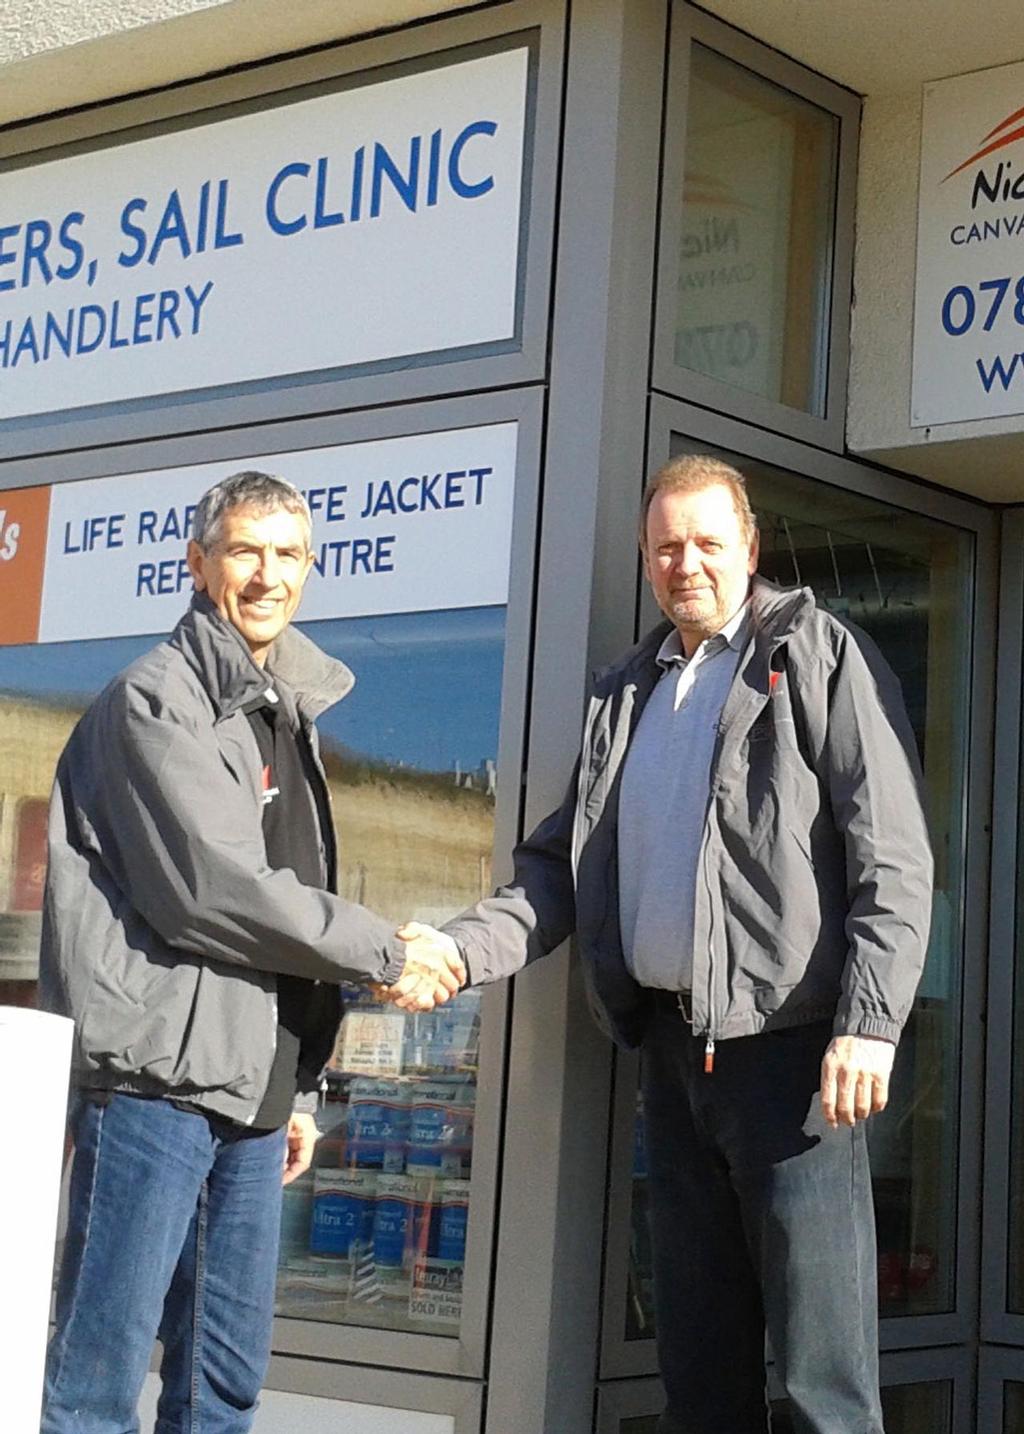 Dave Richards, sail consultant at Elvstrom Sails UK seals the deal with Phil Godfrey of Nickys Canvasworks and Sail Clinic in Brighton © Liz Rushall